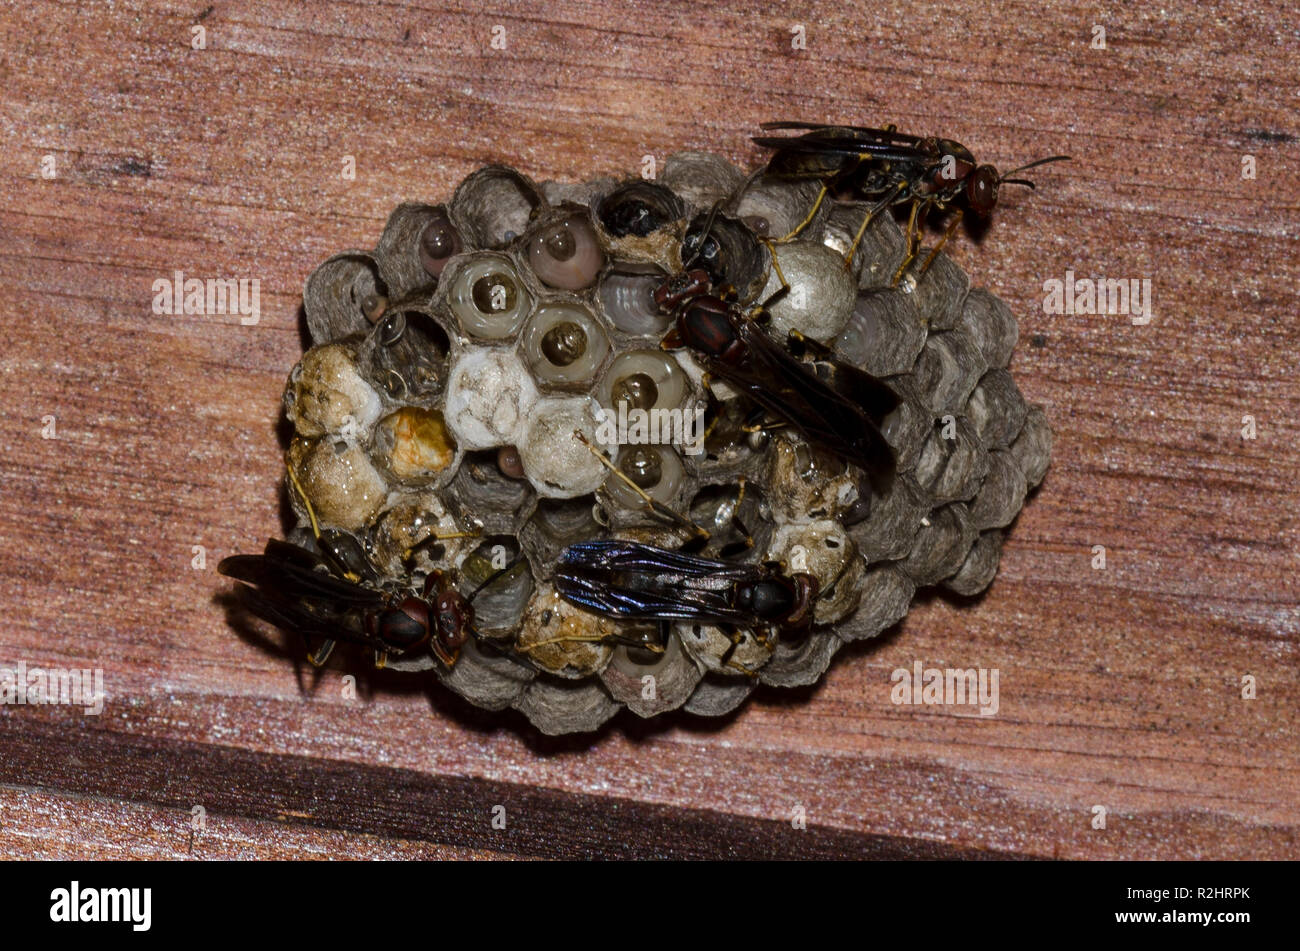 Paper Wasps, Polistes metricus, on nest Stock Photo